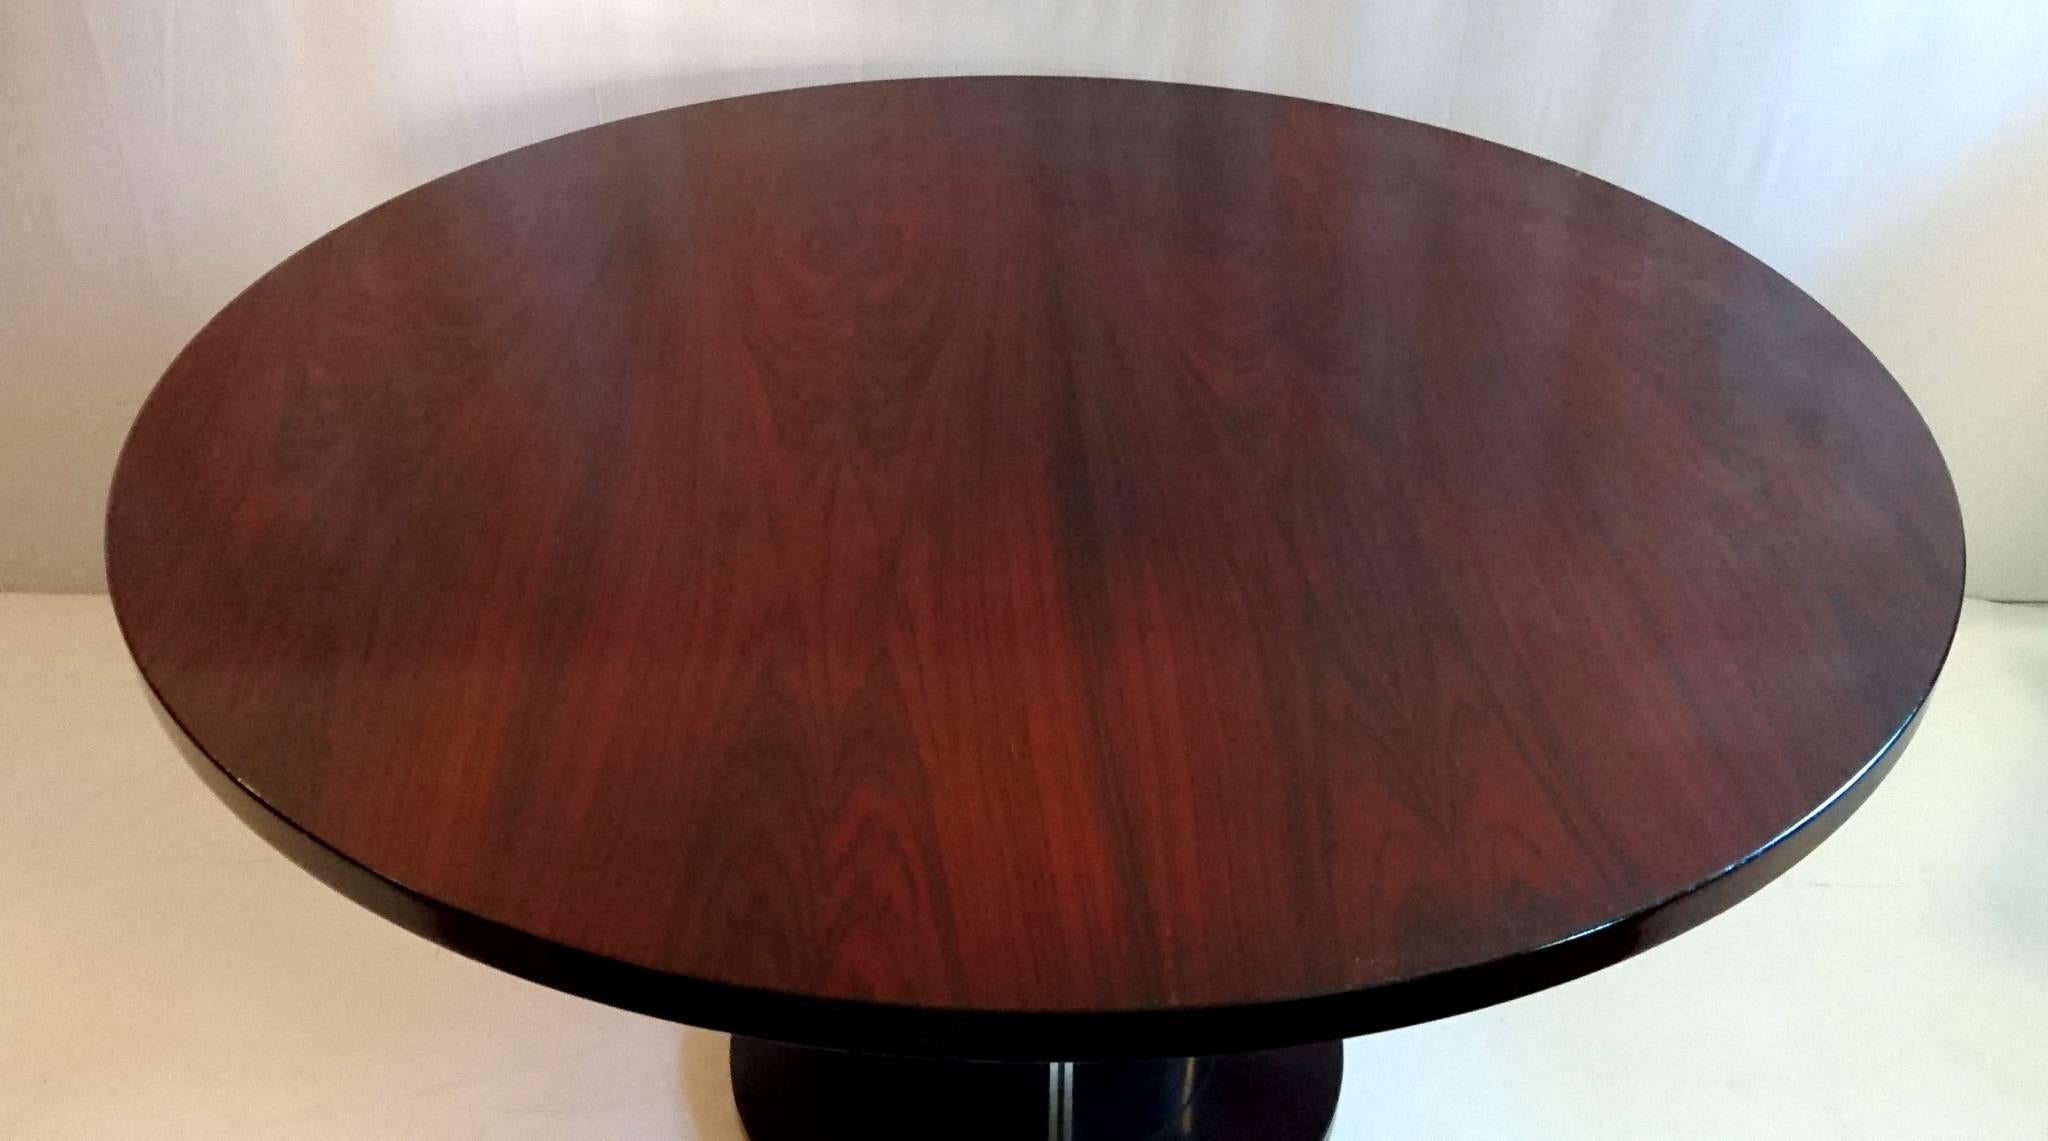 Dining table, model with a top made from rosewood and a pillar made from purple-colored plexiglass and aluminium with a rosewood base. Simply astonishing quality and the top looks like new.
This table has been part of a dining room set. Please look